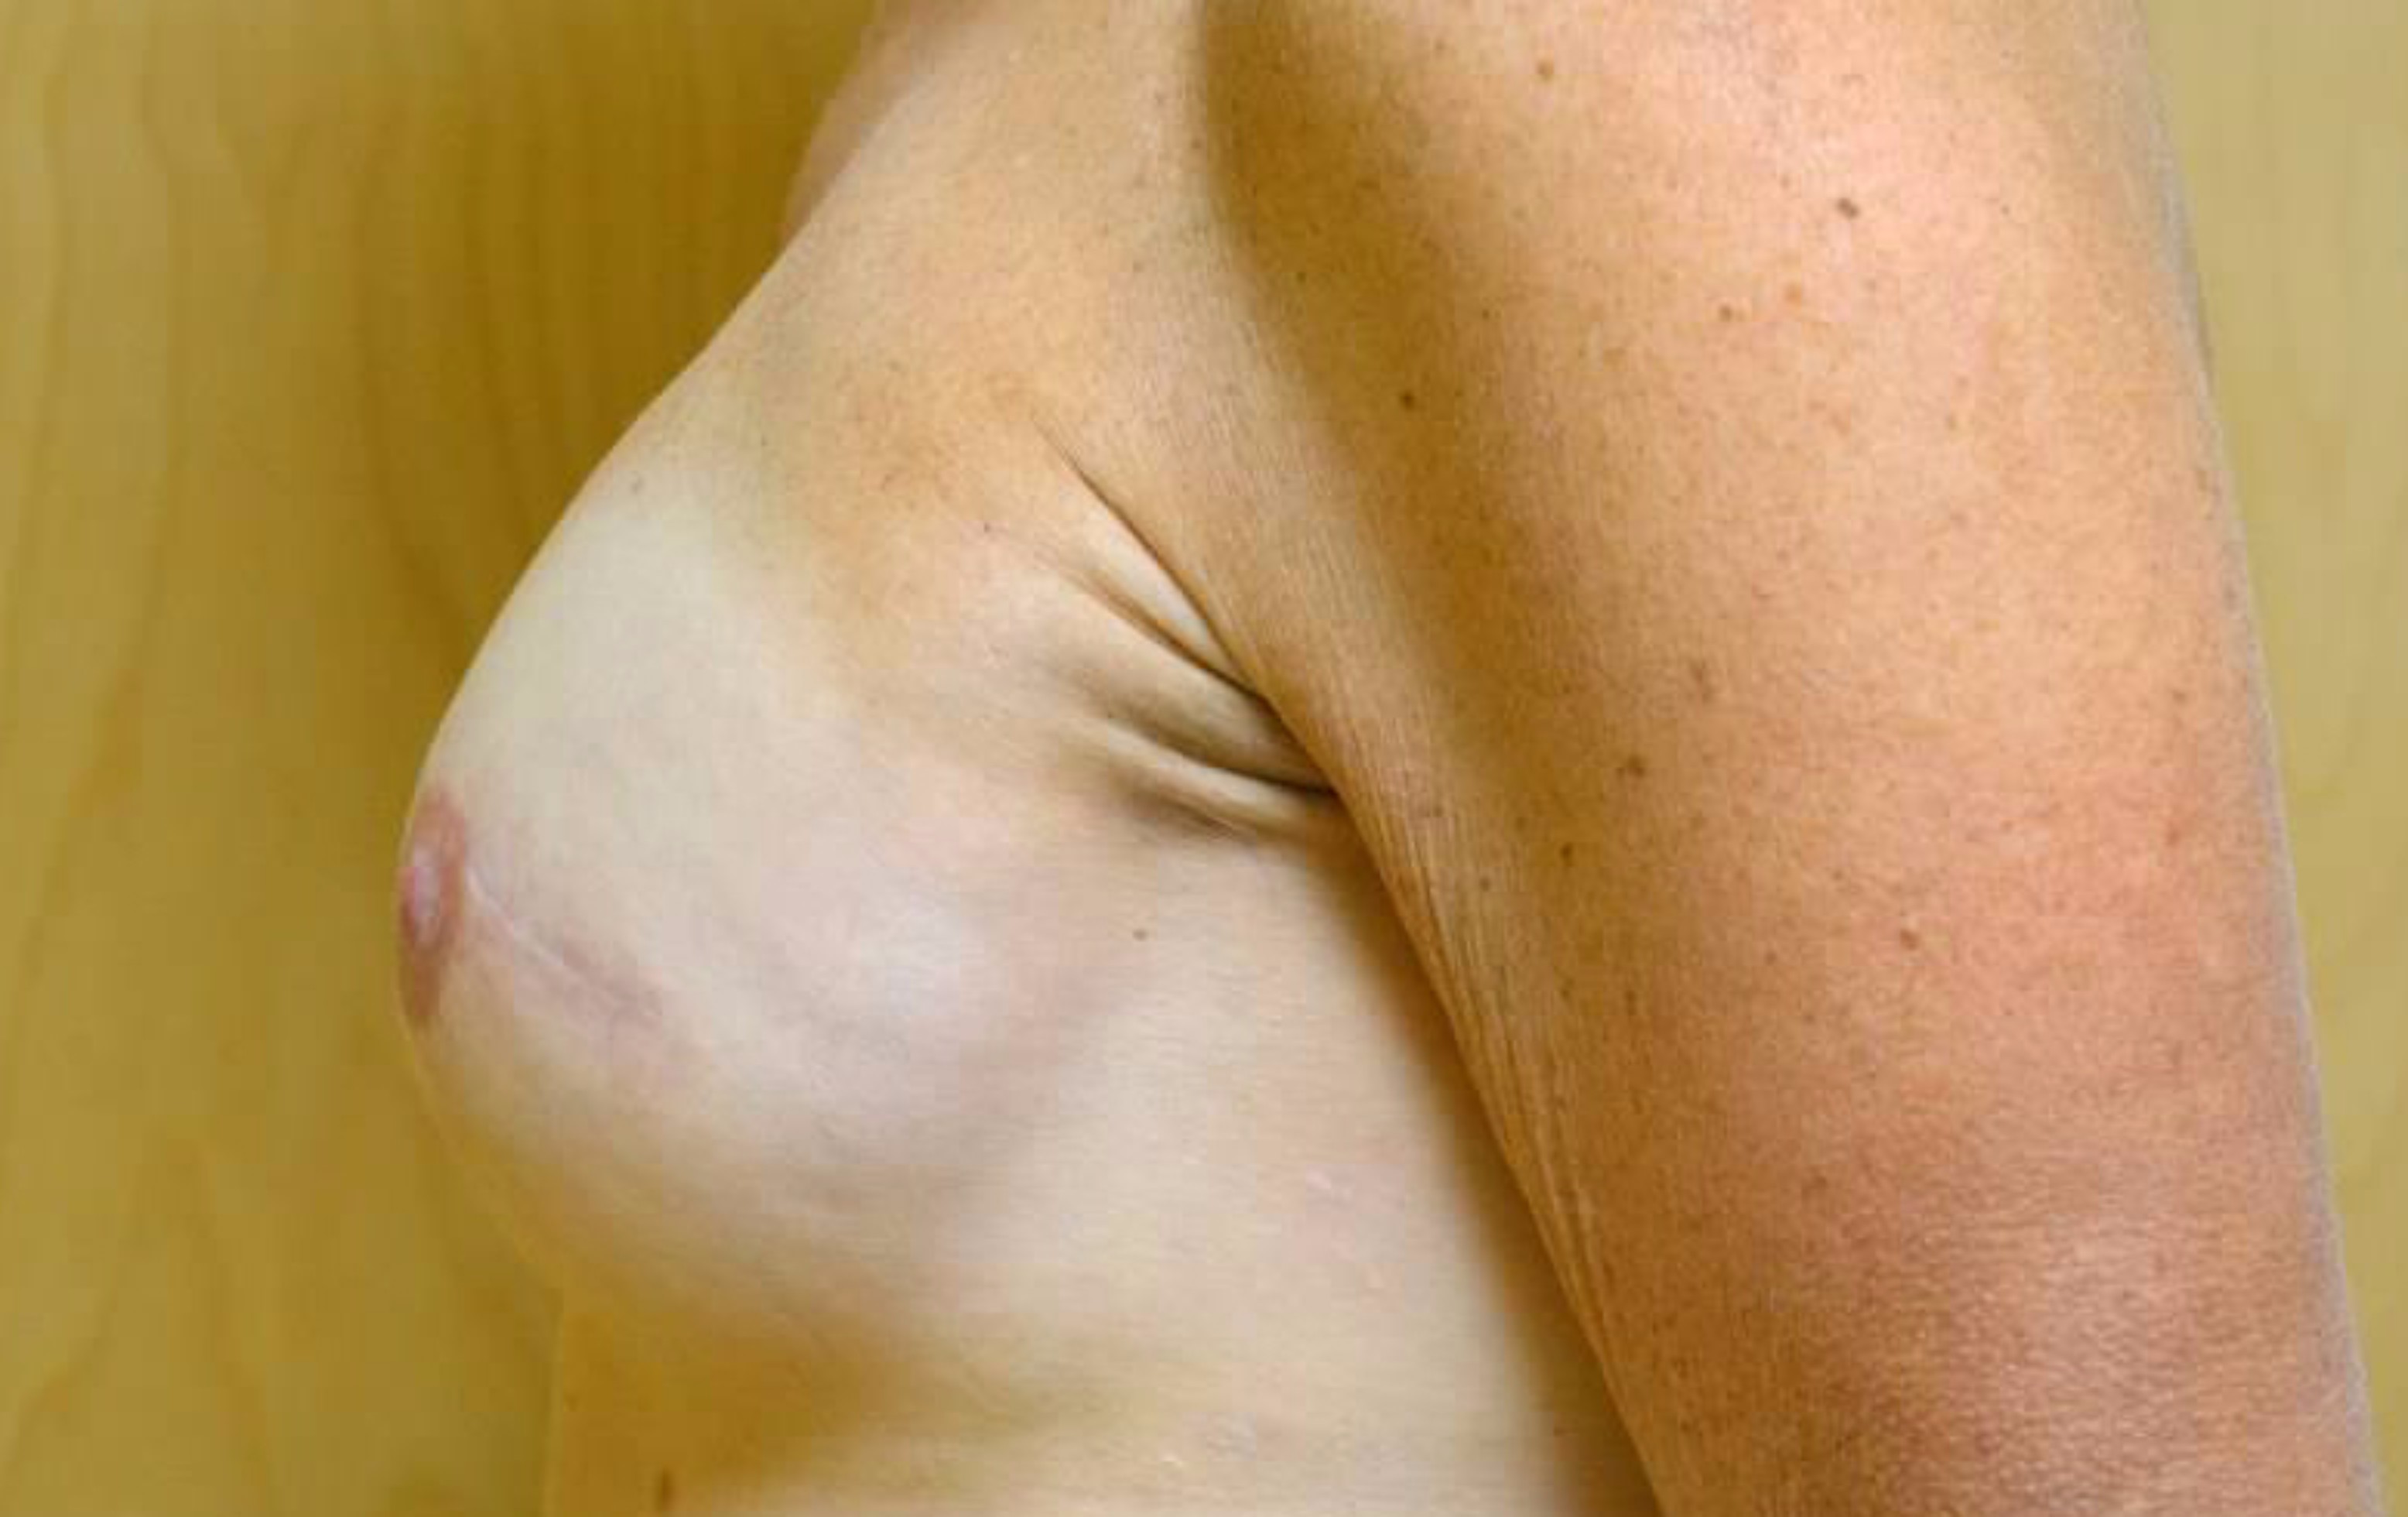 Rhode Island breast reconstruction before and after